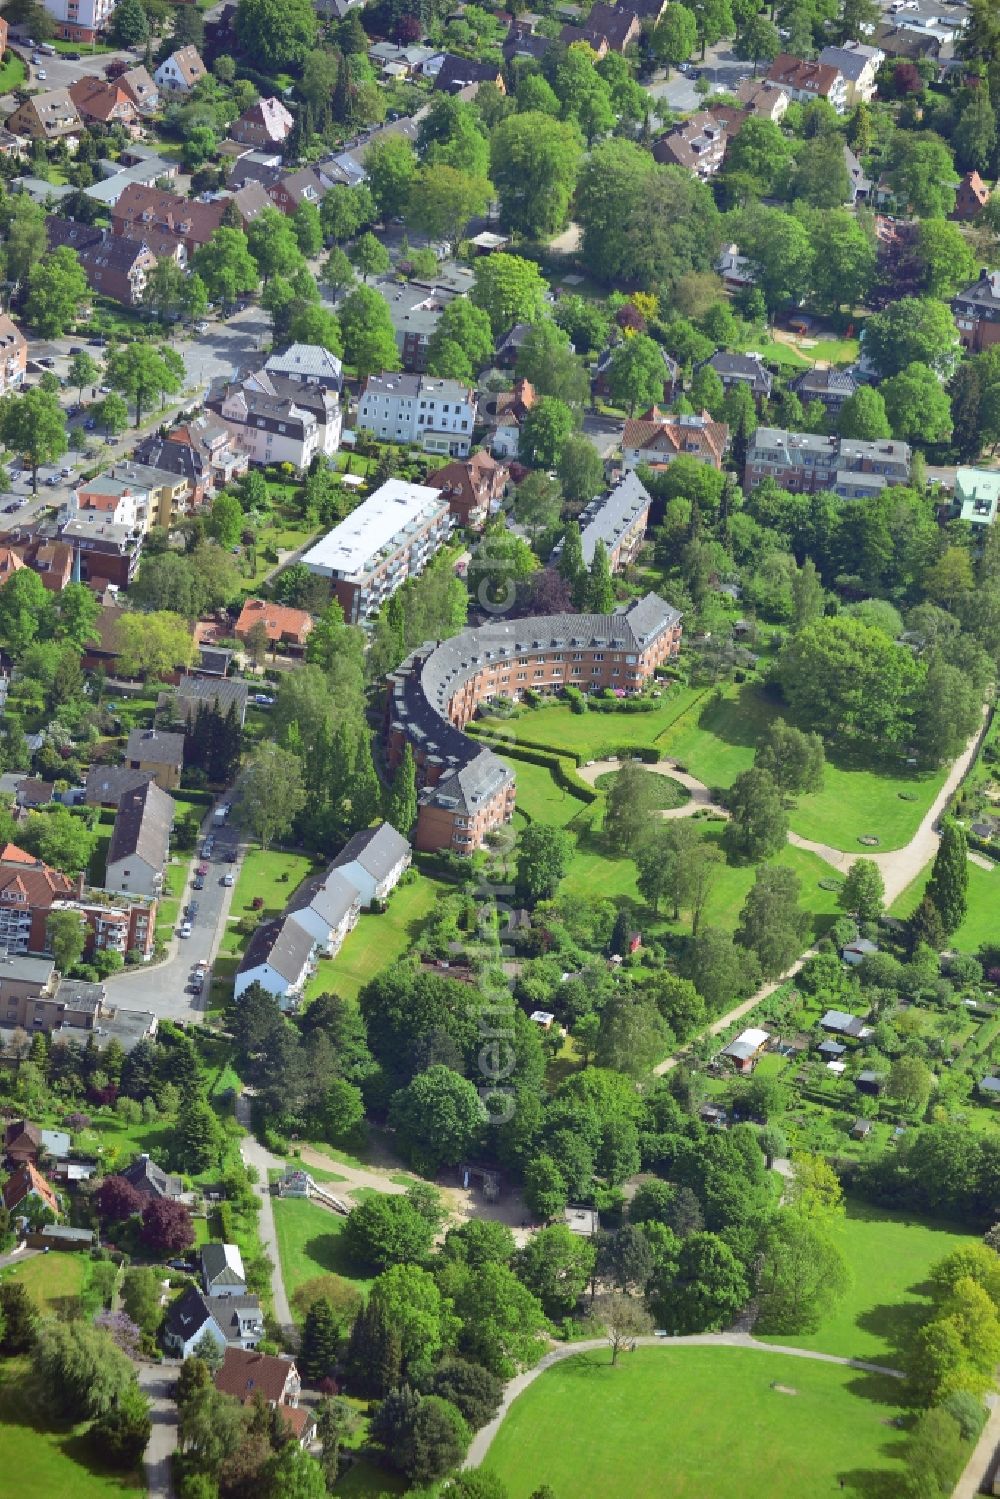 Aerial photograph Lübeck - Draeger Park and residential buildings in the Marli part of St.Gertrud in Luebeck in the state of Schleswig-Holstein. St.Gertrud is the Easternmost historic suburb of Luebeck. Located on the riverbank of the Wakenitz, there are several green areas such as Draegerpark and historic residential buildings. The red, semi-circular building with the adjacent park is especially distinct